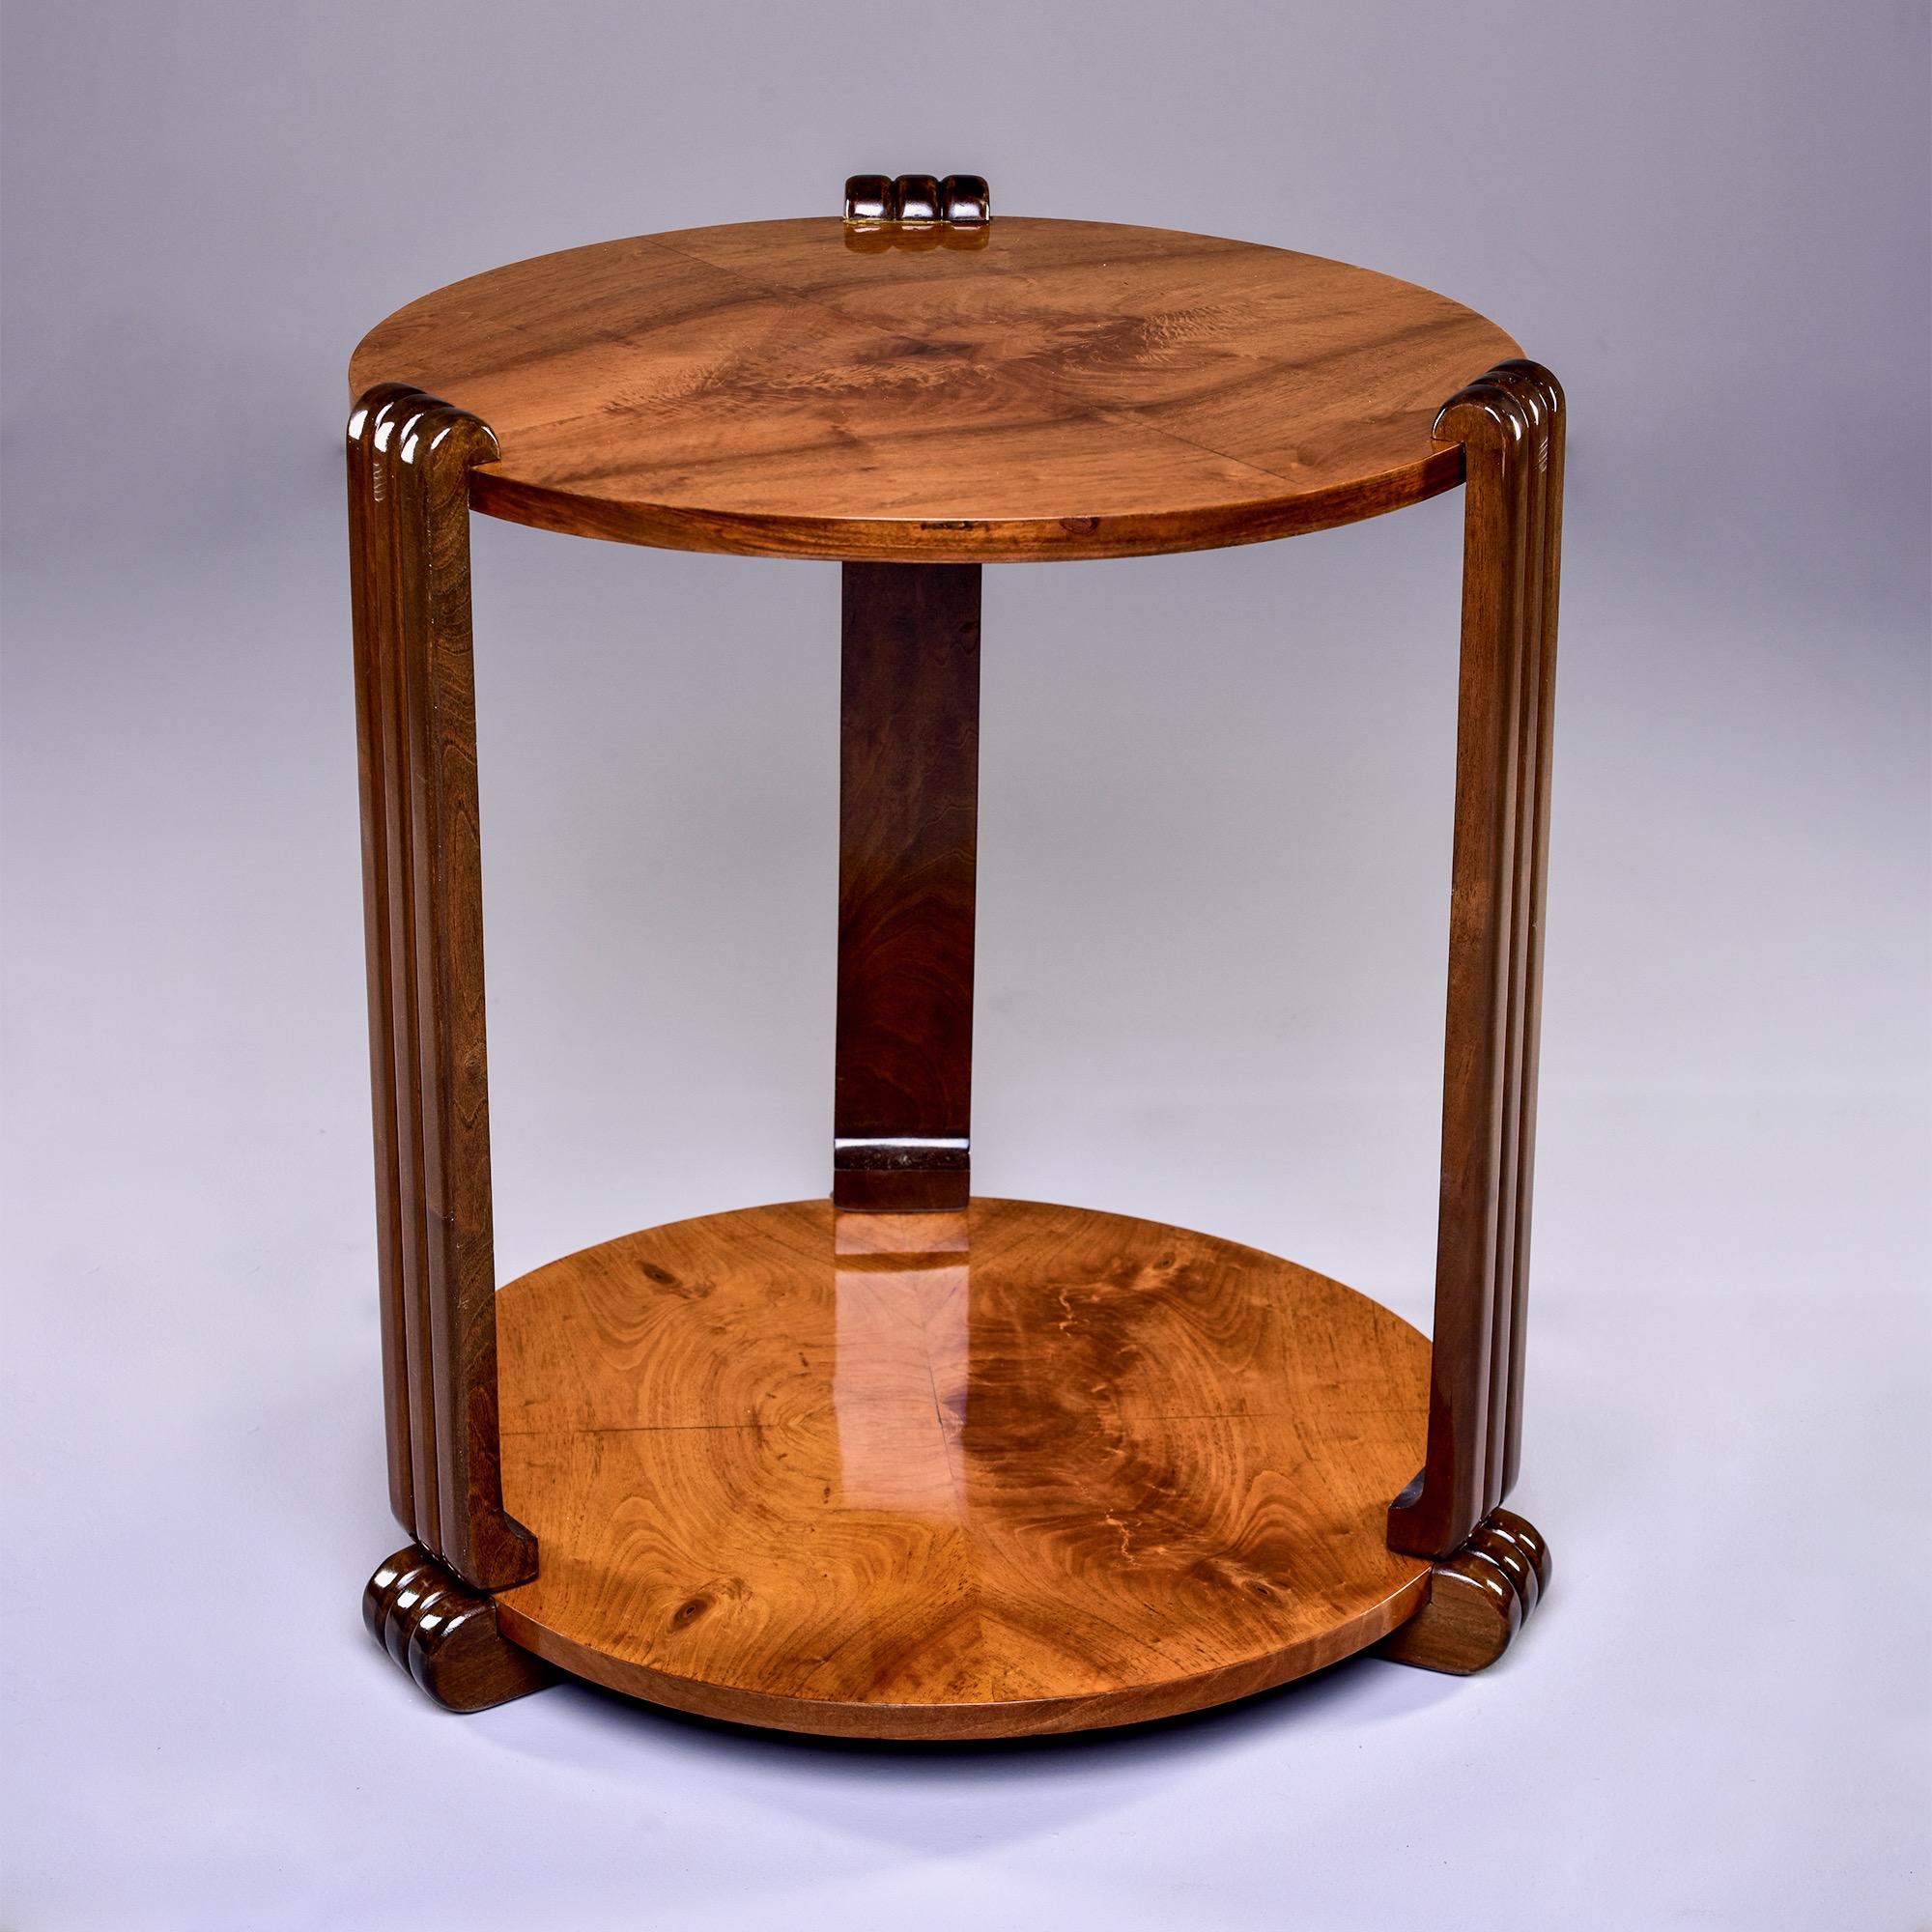 Circa 1930s French round side or center table features a highly figured walnut veneer top and base with contrasting darker reeded side supports and feet. Unknown maker. Professionally refinished.